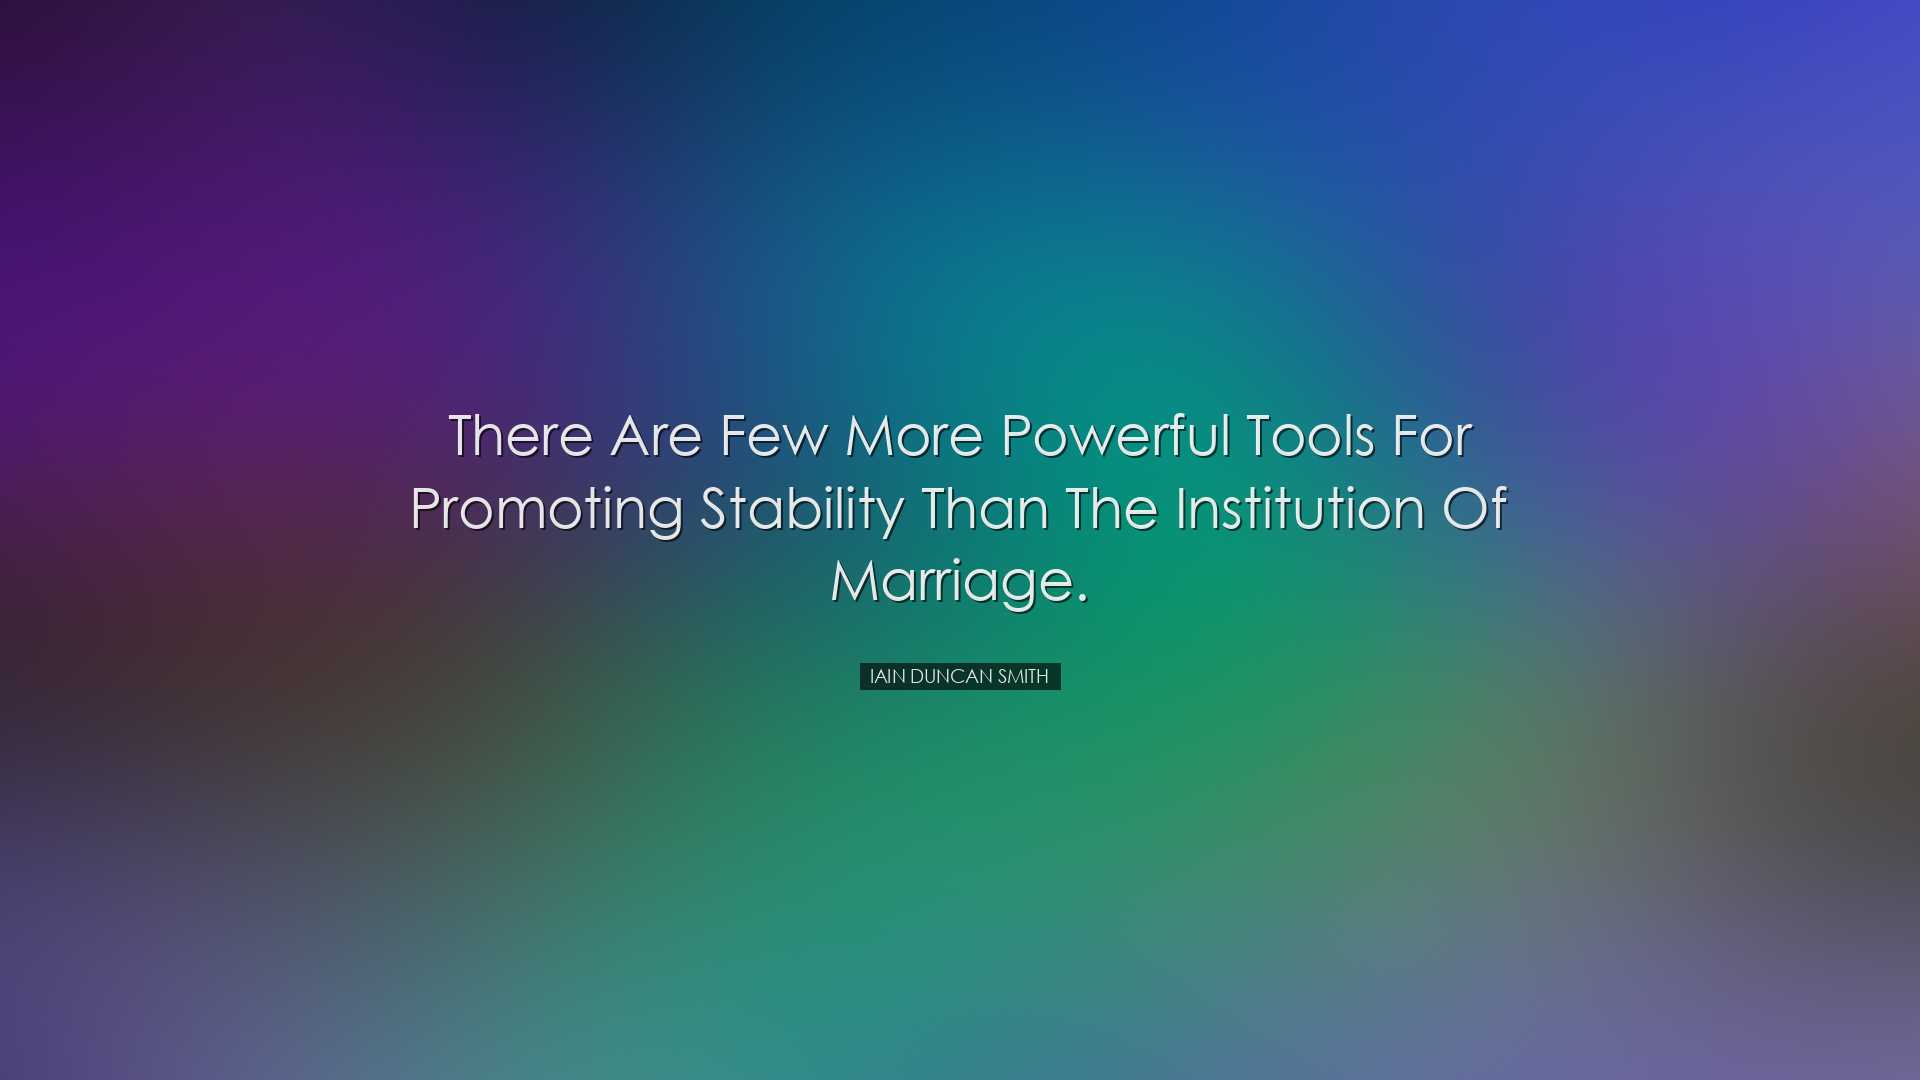 There are few more powerful tools for promoting stability than the